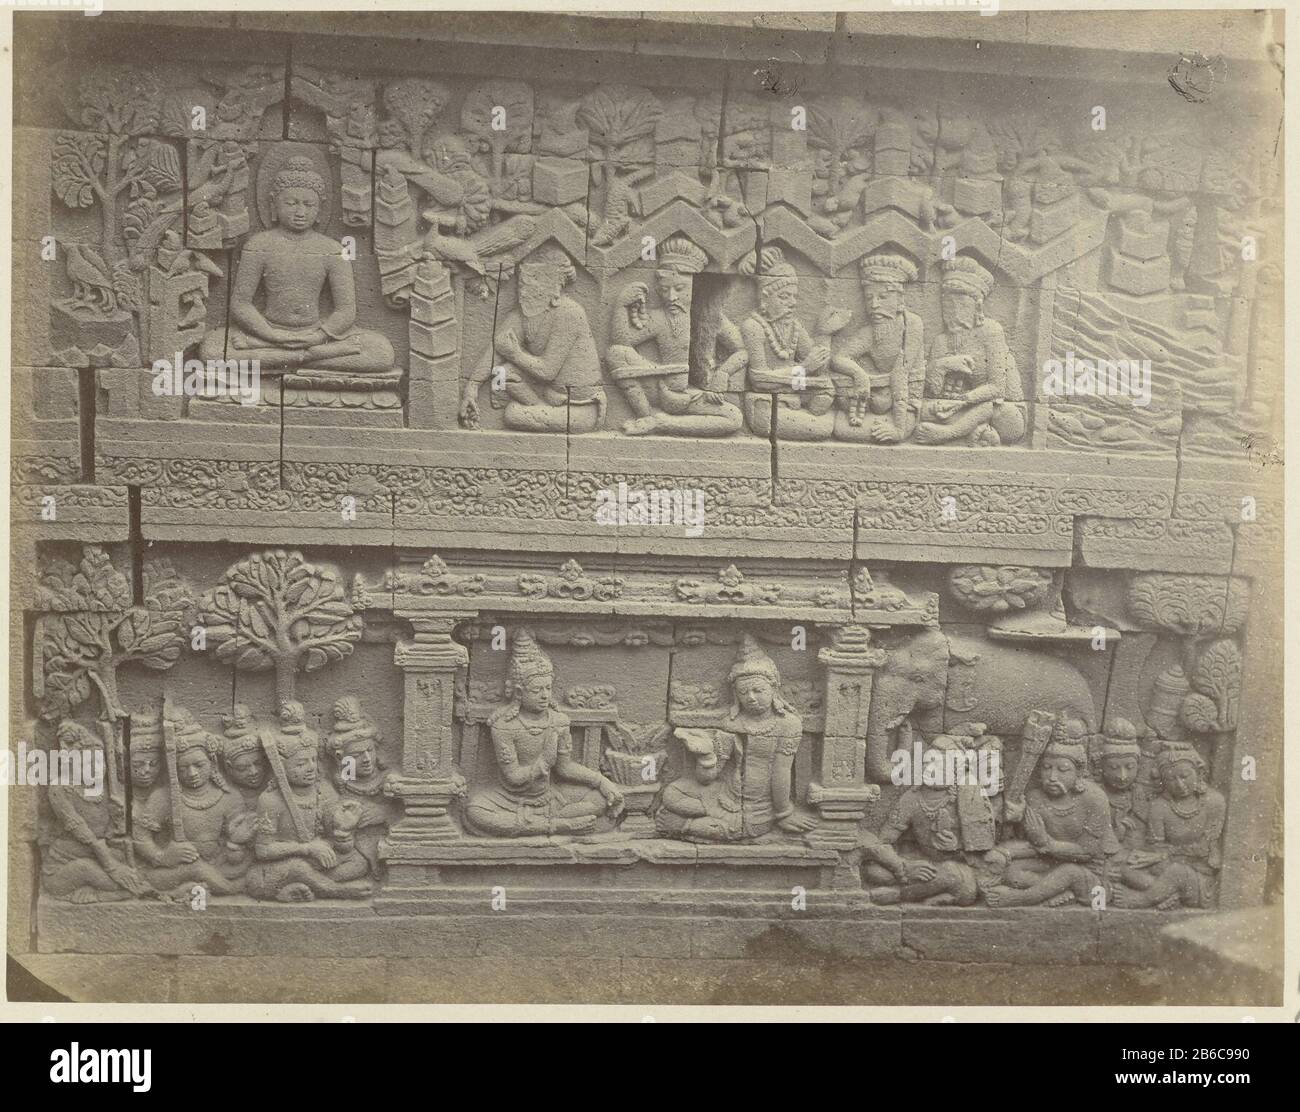 Where: the upper part tells a story of Siddhartha in Lalitavistara and lower a Avadana relief story Rudrayana. Manufacturer : photographer: Isidore Kinsbergen Place manufacture: Java (possible) Date: Sep 1873 - Dec 1873 Physical features: albumen print material: paper paper cardboard Technique: albumen print dimensions: photo: h 300 mm b × 400 mmToelichtingGallery I, main wall, north side 37 (top): Relief 1a-76, Lalitavistara relief, Siddhartha meditating in Gaya, Accompanied by ascetics. 37 (bottom): relief 1b-76, Avadana relief, Rudrayana story, King Rudrayana announces his renouncement of t Stock Photo